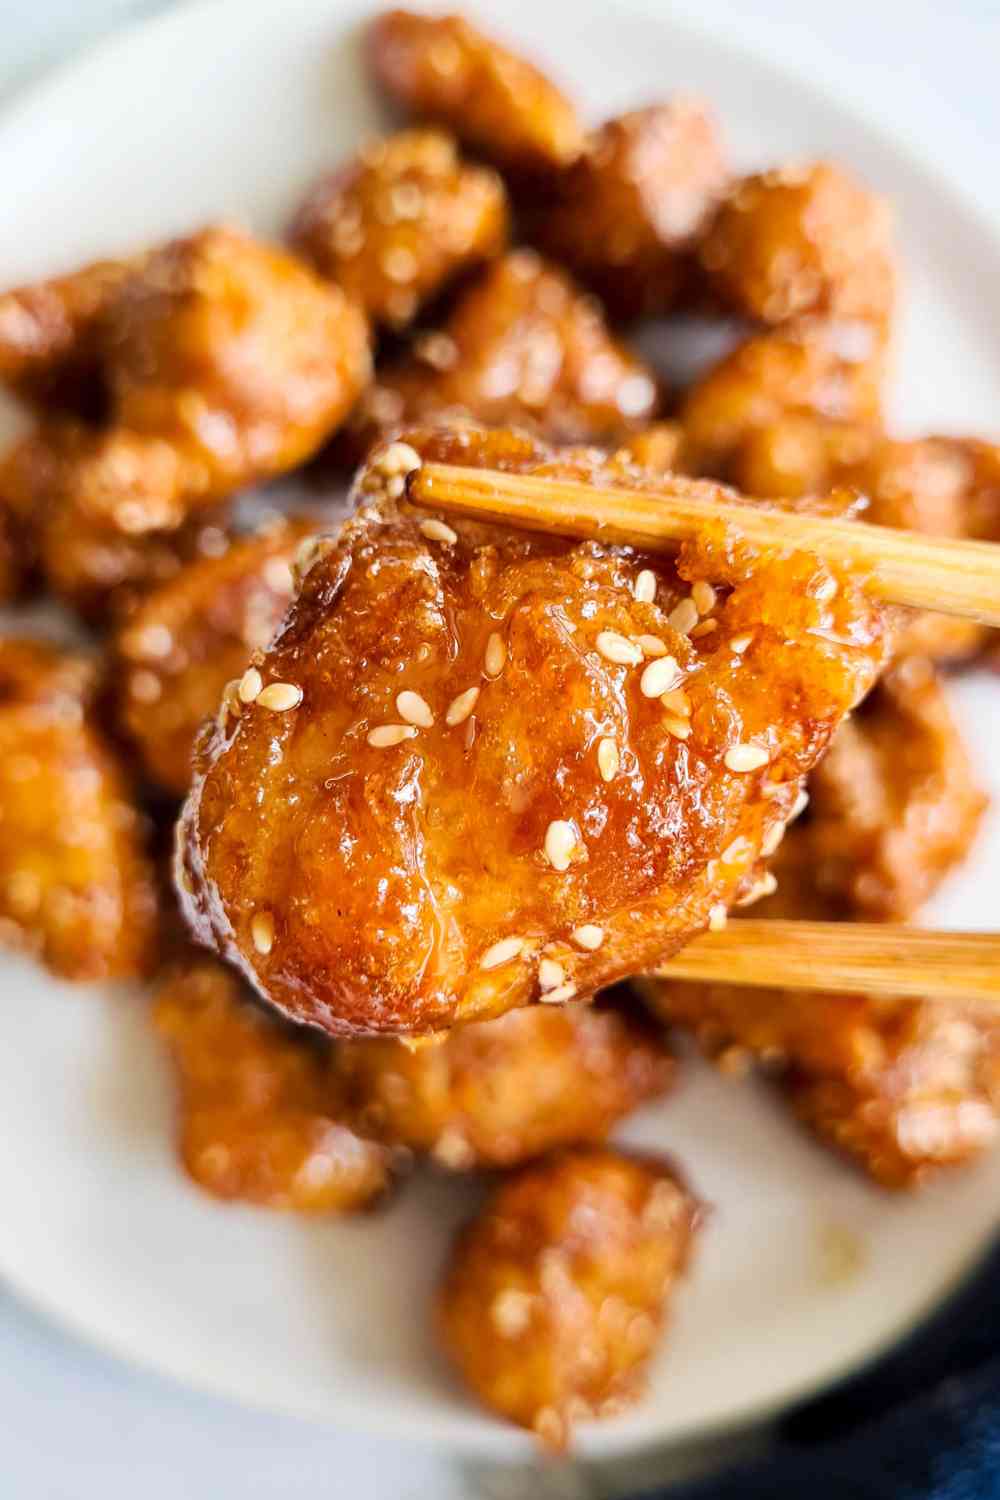 A piece of crispy chicken bite being held up of a pair of chopsticks